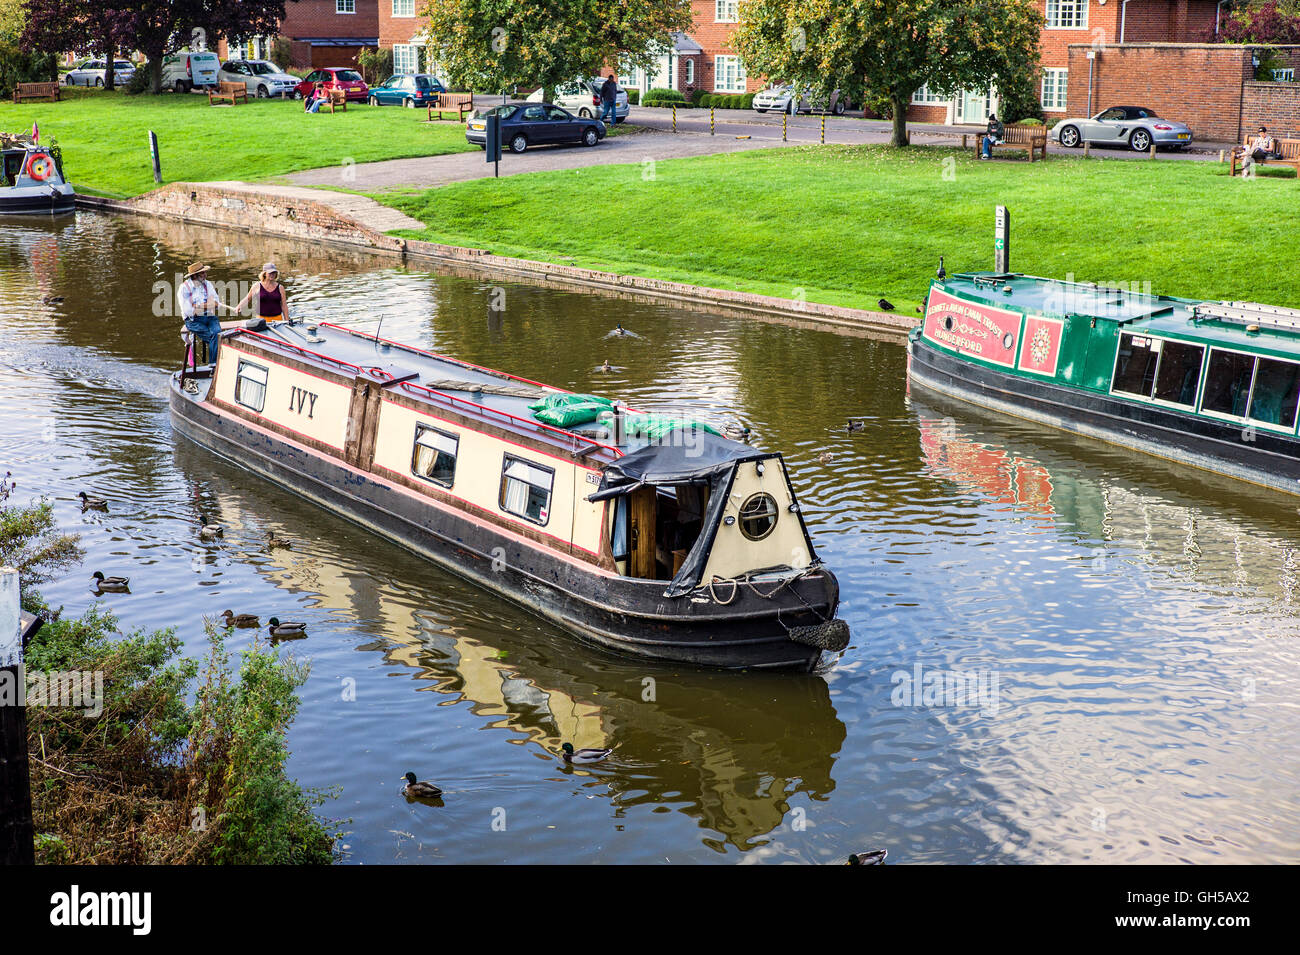 Narrow boat IVY sailing through Hungerford town on the Kennet and Avon canal in Berkshire UK Stock Photo